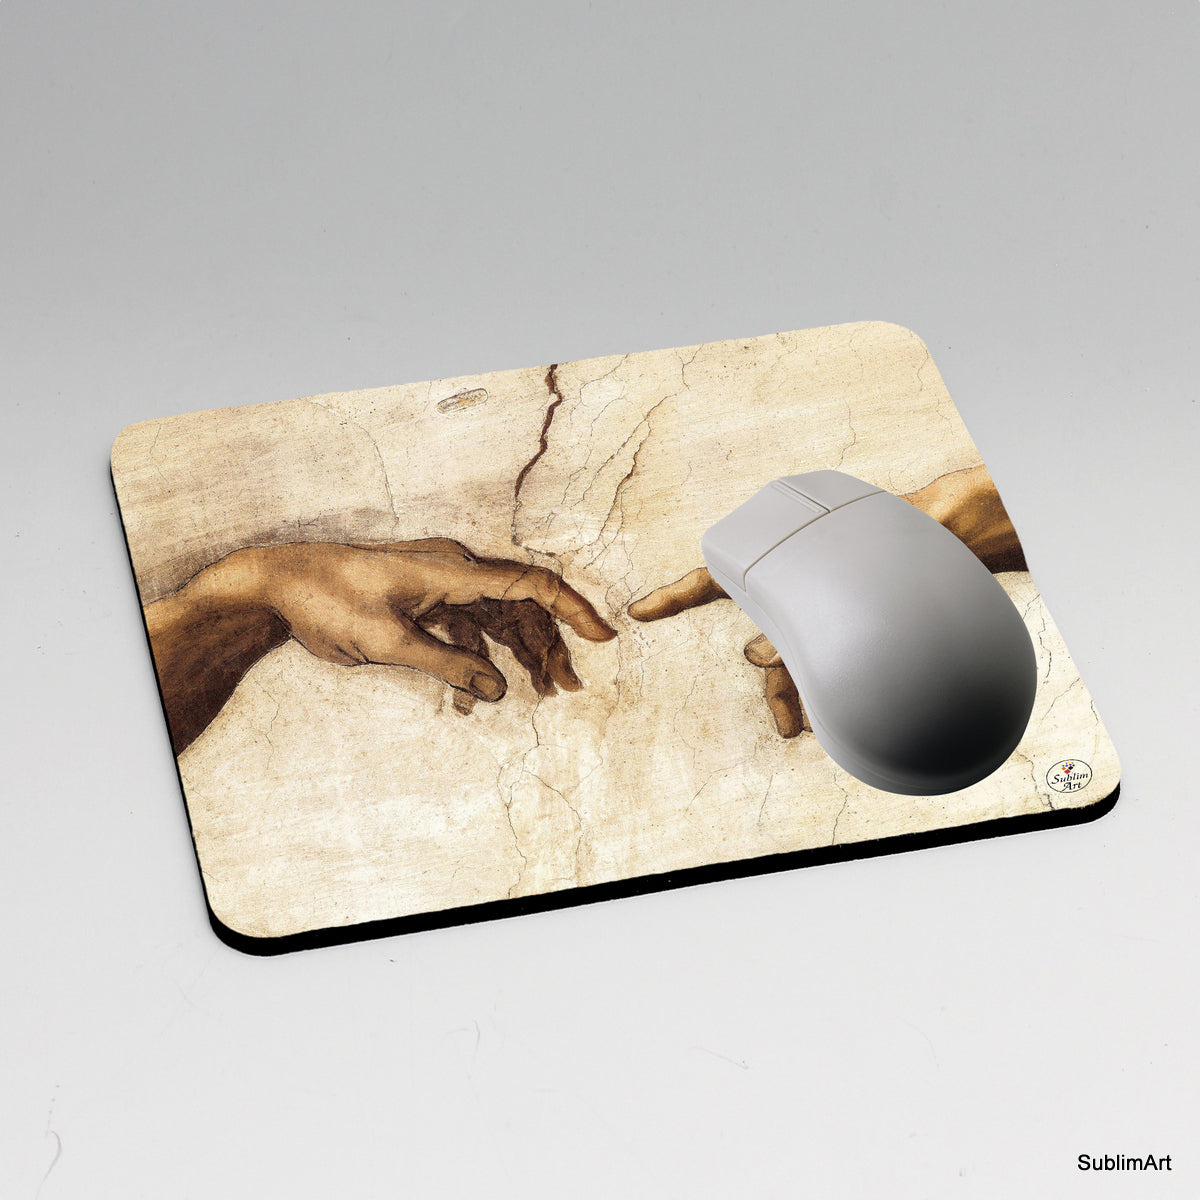 MOUSE PAD: Design Creation of Adam detail by Michelangelo